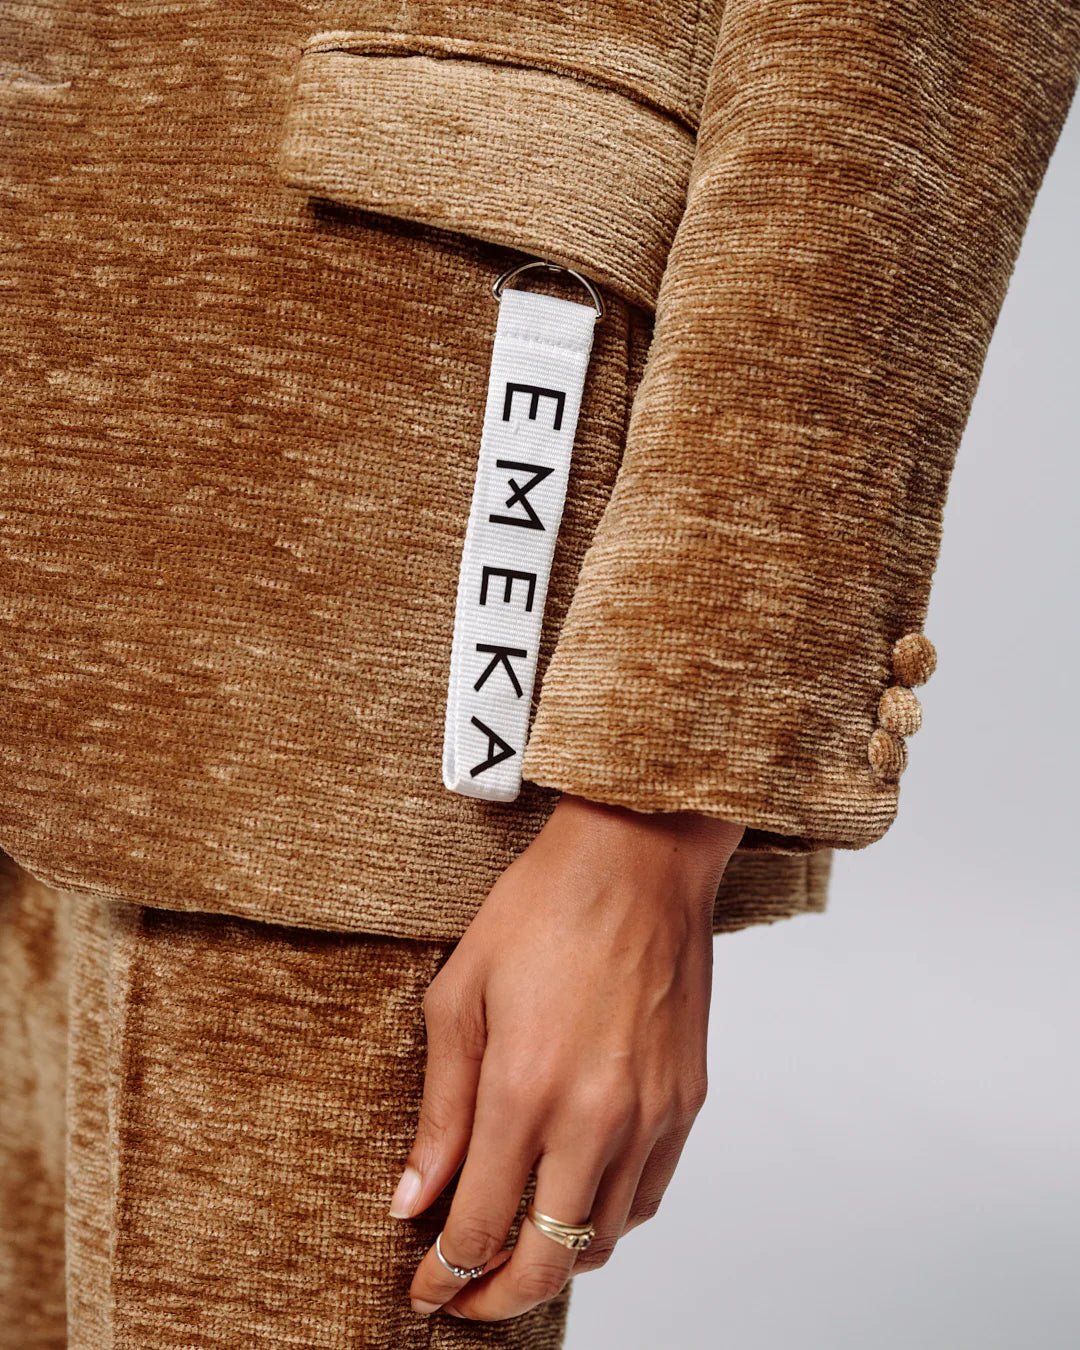 Unisex Business Unusual Suit — Brown Suede by Emeka at White Label Project